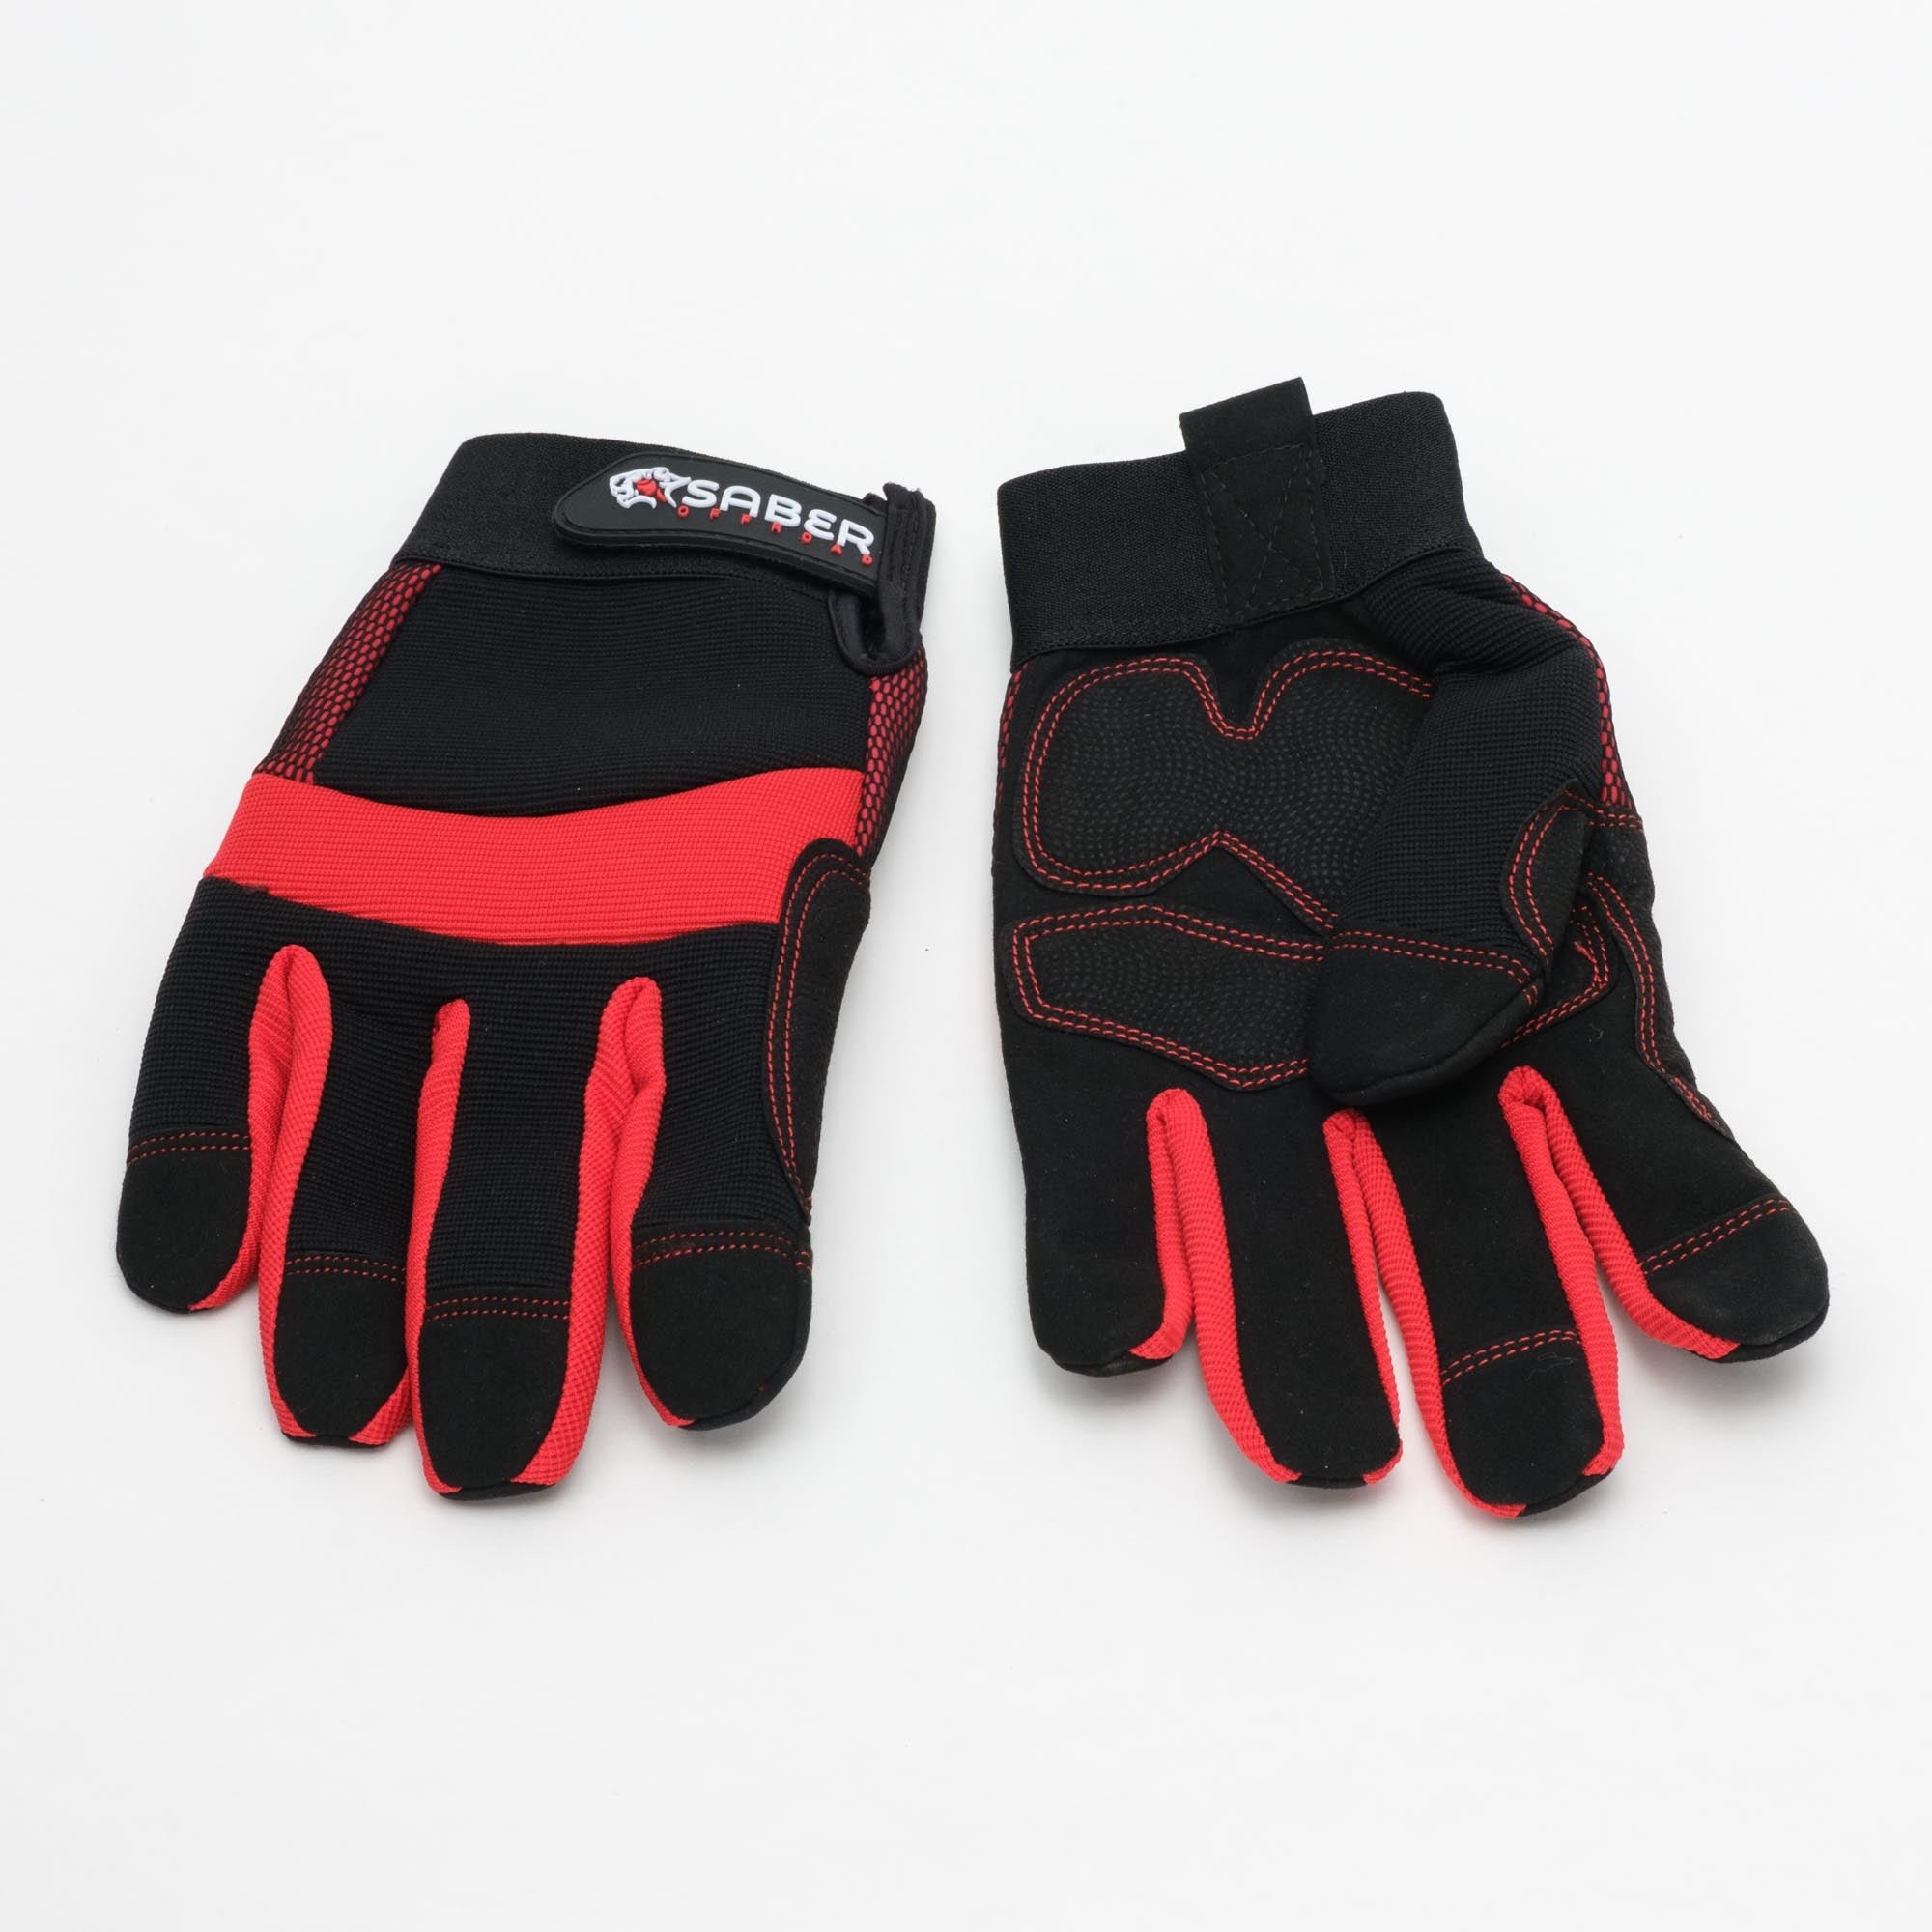 Saber Recovery Gloves - L/XL